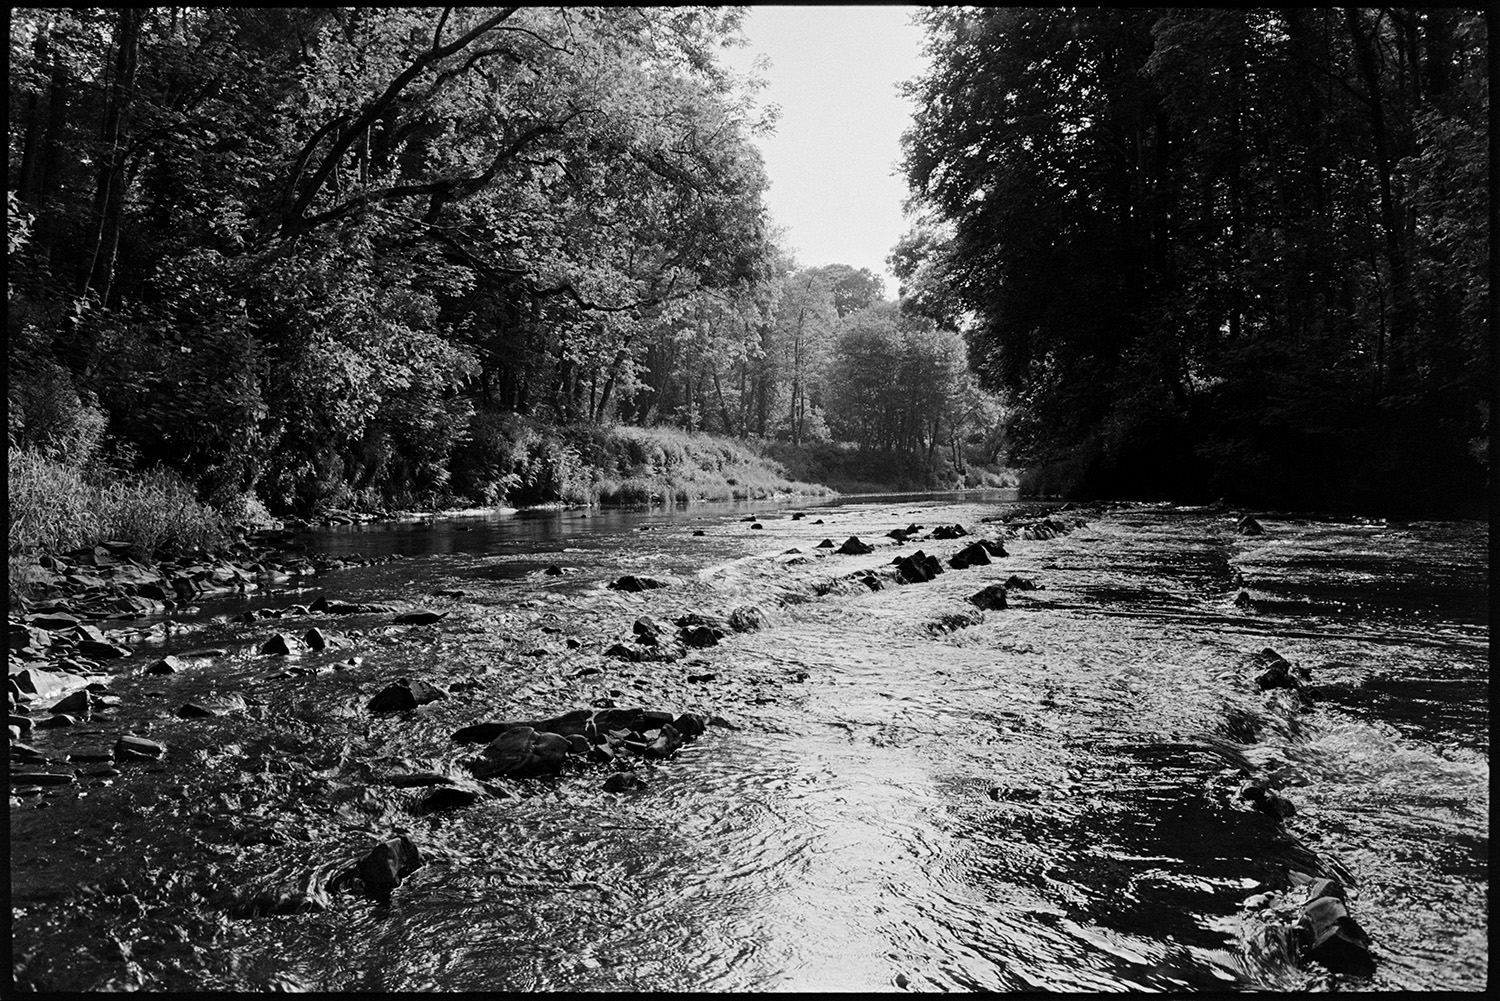 Sunlit river running through trees. 
[The River Torridge running through woodland below Woolleigh, Beaford. Rocks on the riverbed have formed a small weir across the river.]